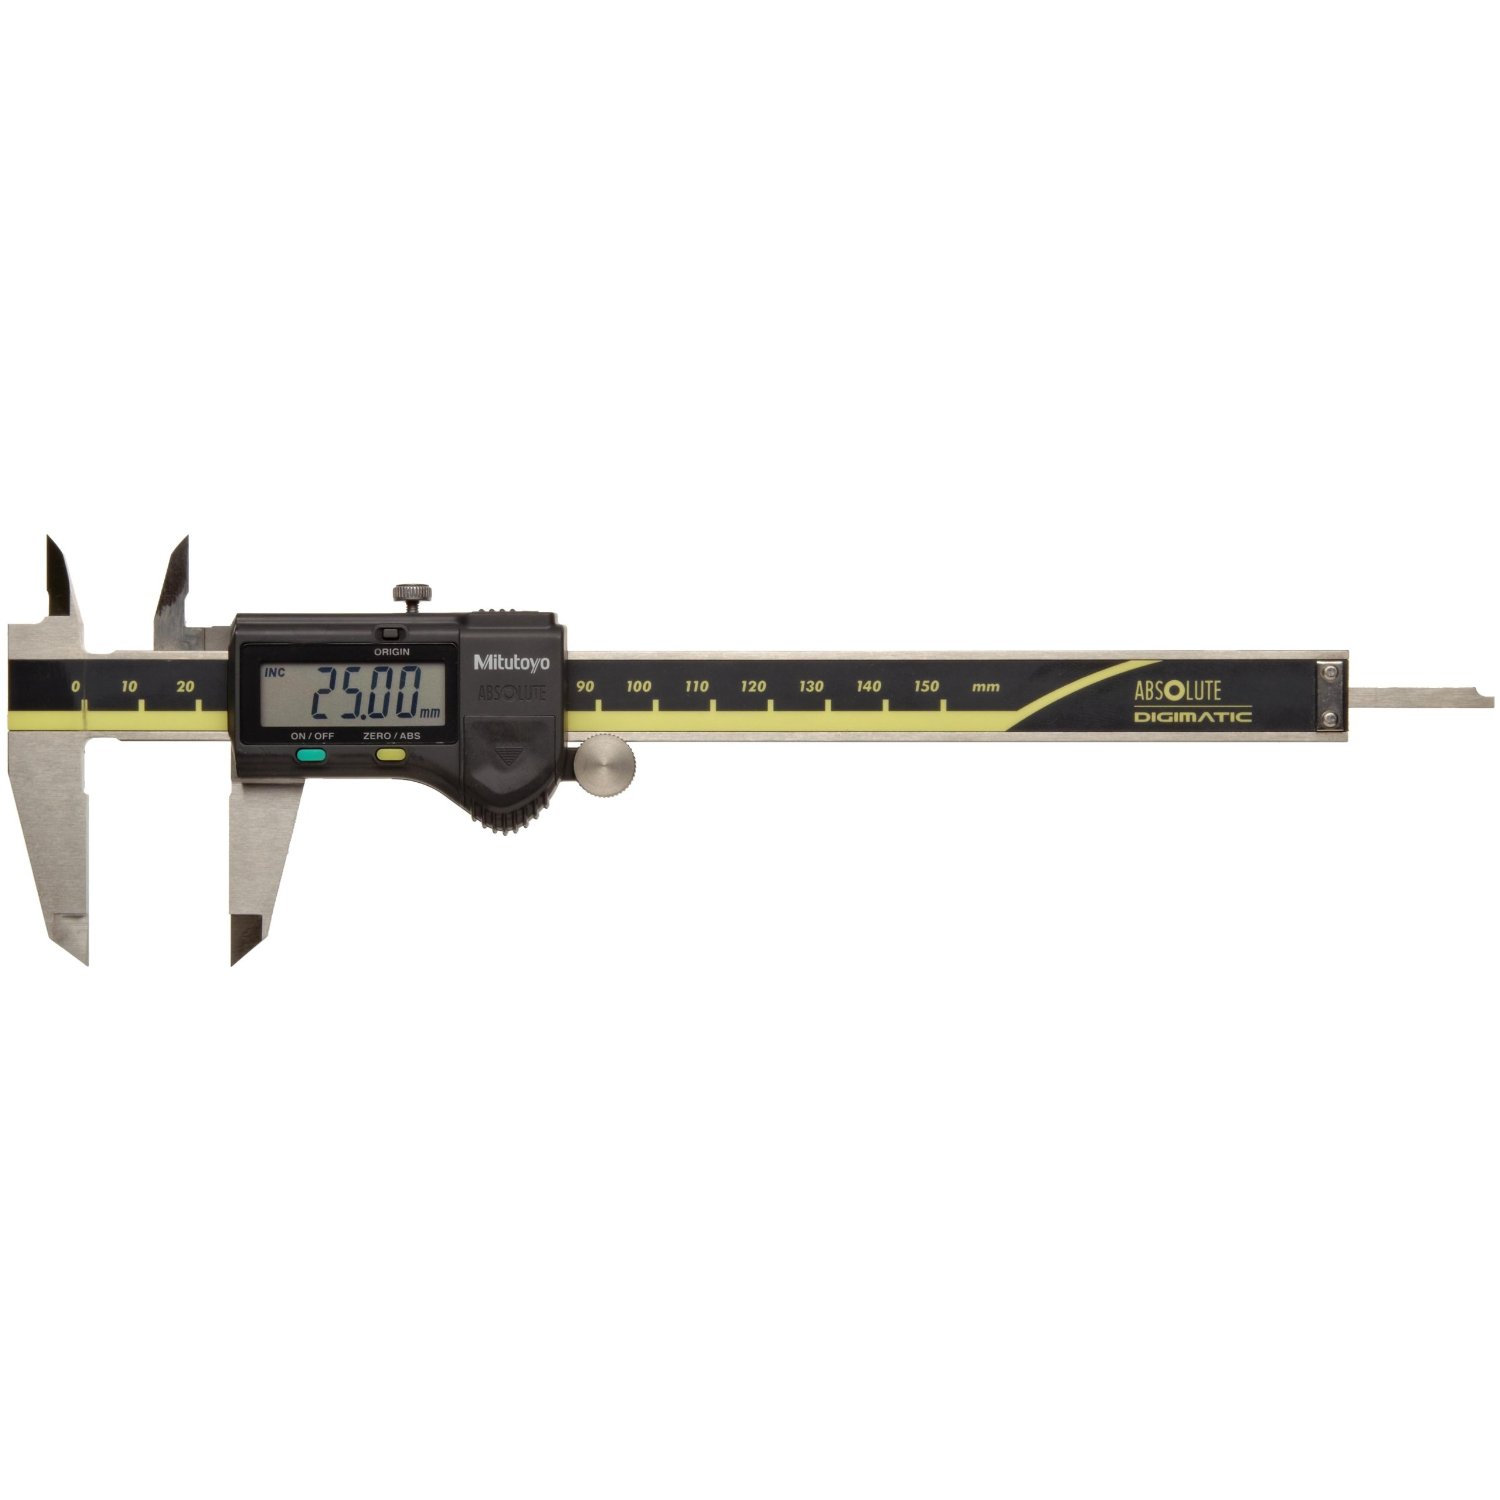 Mitutoyo 500-151-30 AOS Absolute Caliper 150mm Range-SPC - Click Image to Close